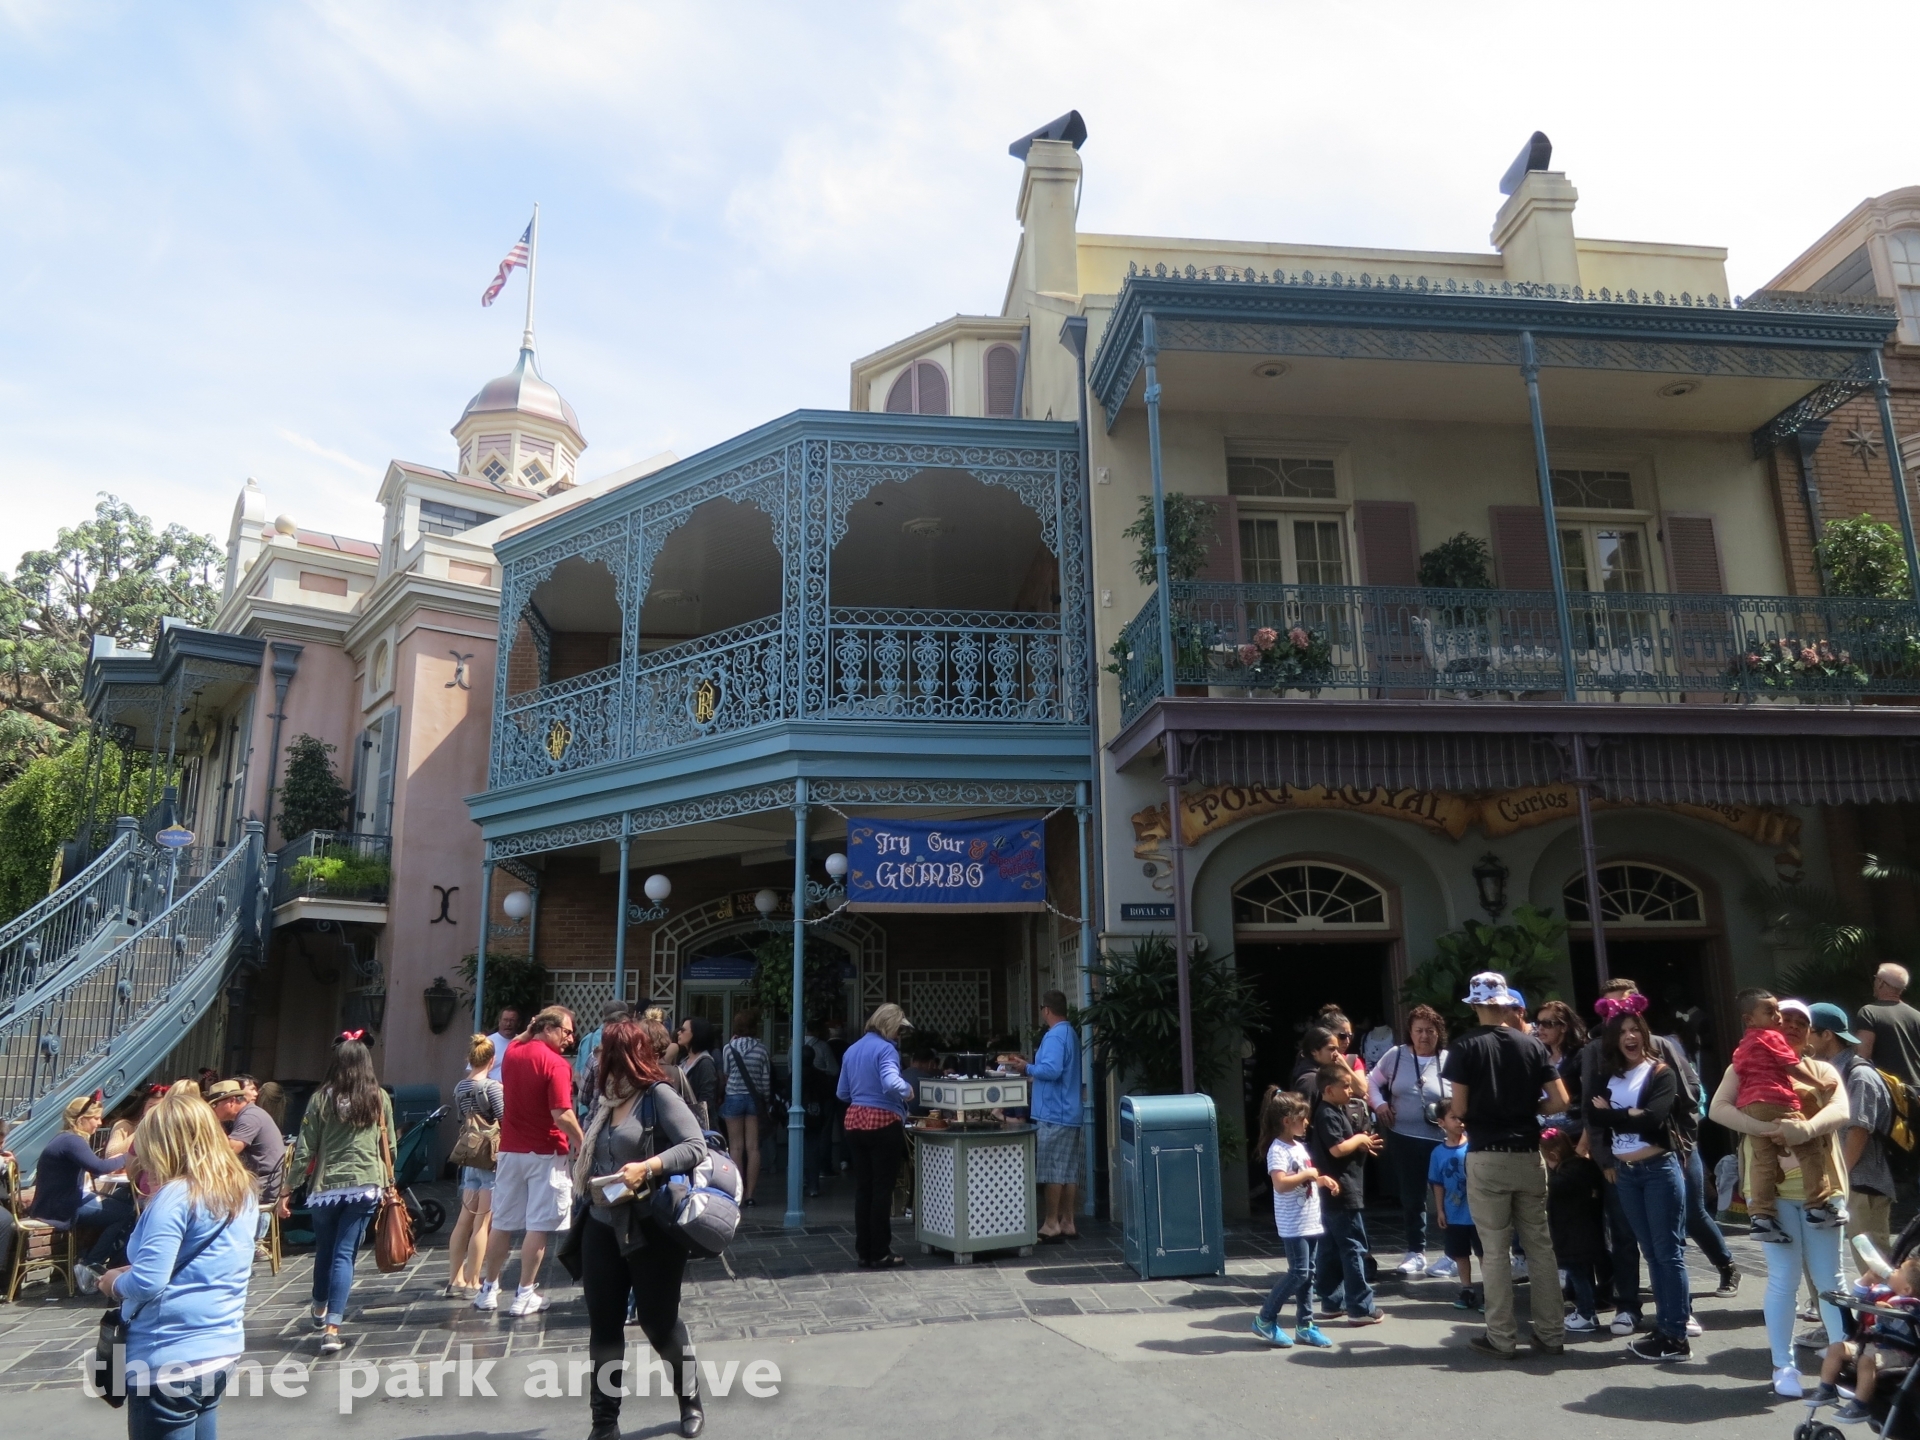 New Orleans Square at Disneyland | Theme Park Archive